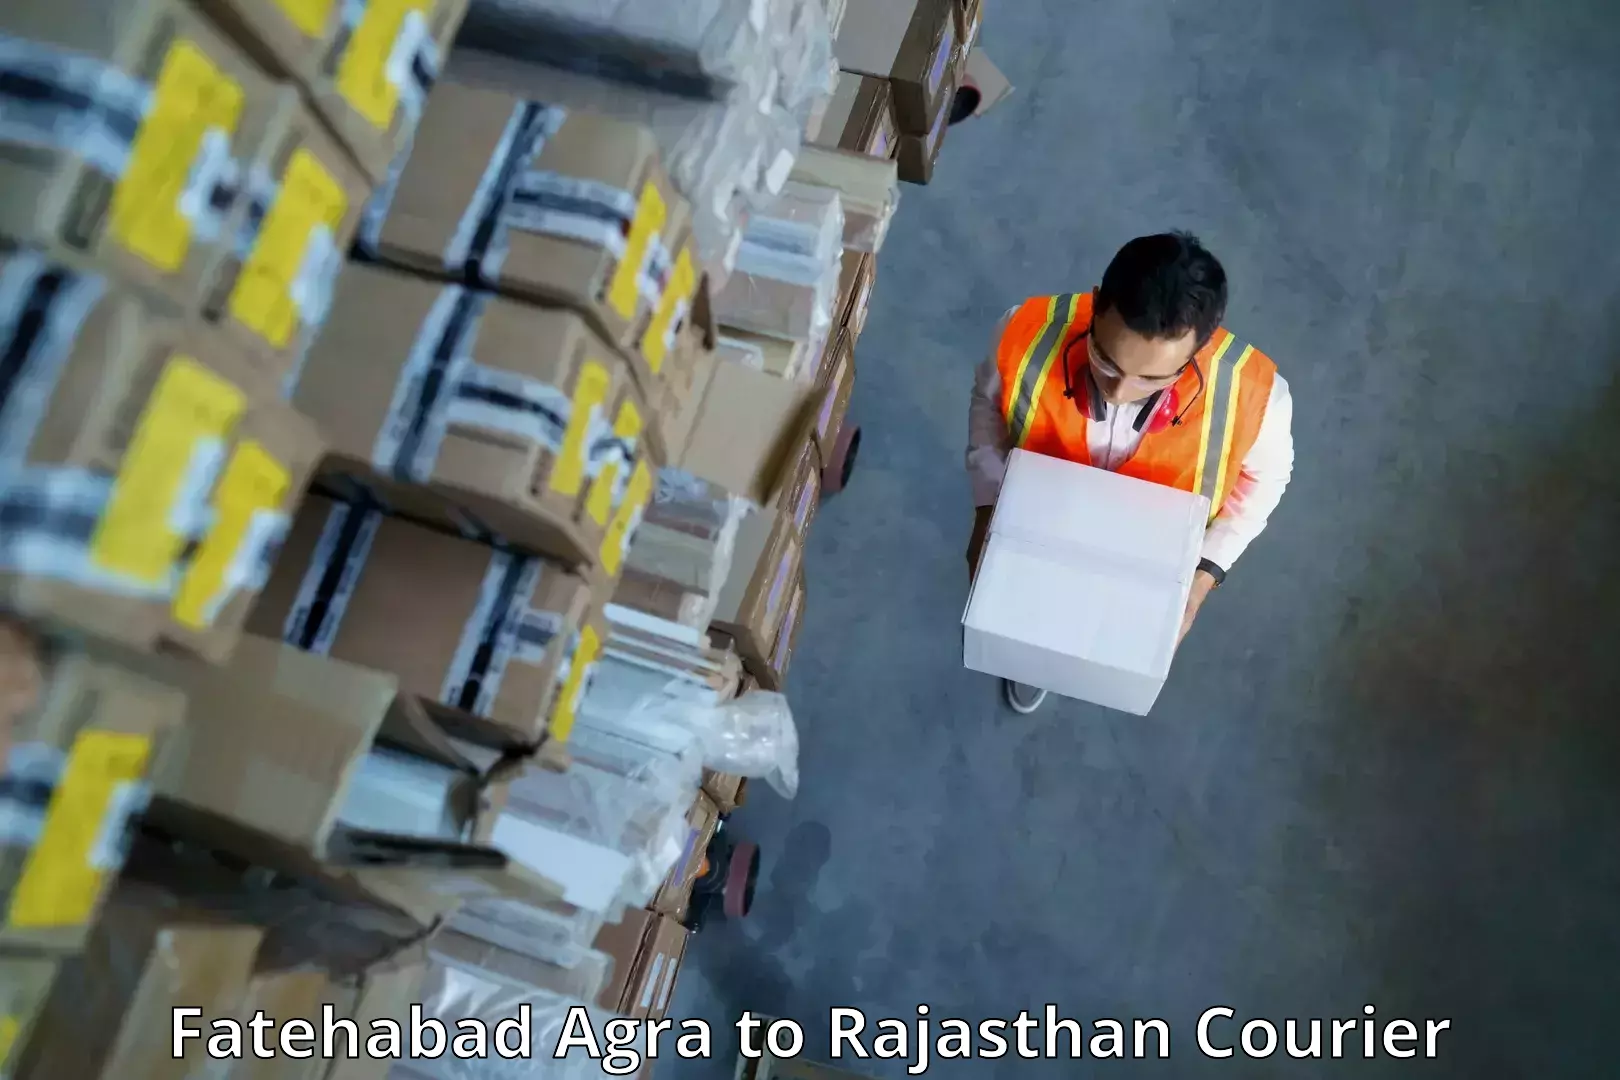 International courier networks Fatehabad Agra to Khanpur